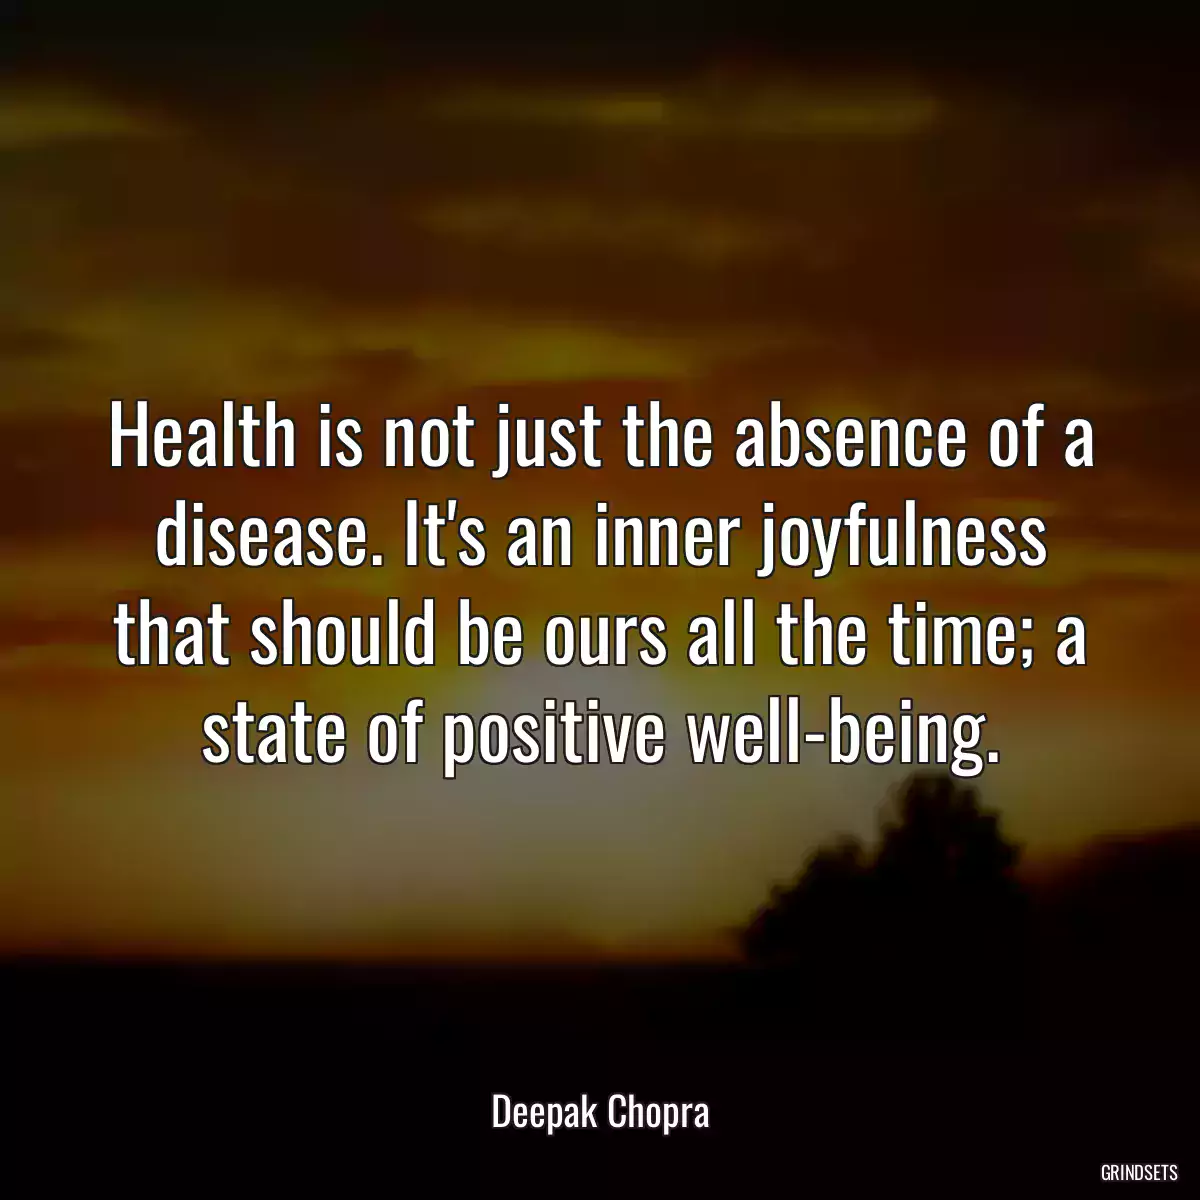 Health is not just the absence of a disease. It\'s an inner joyfulness that should be ours all the time; a state of positive well-being.